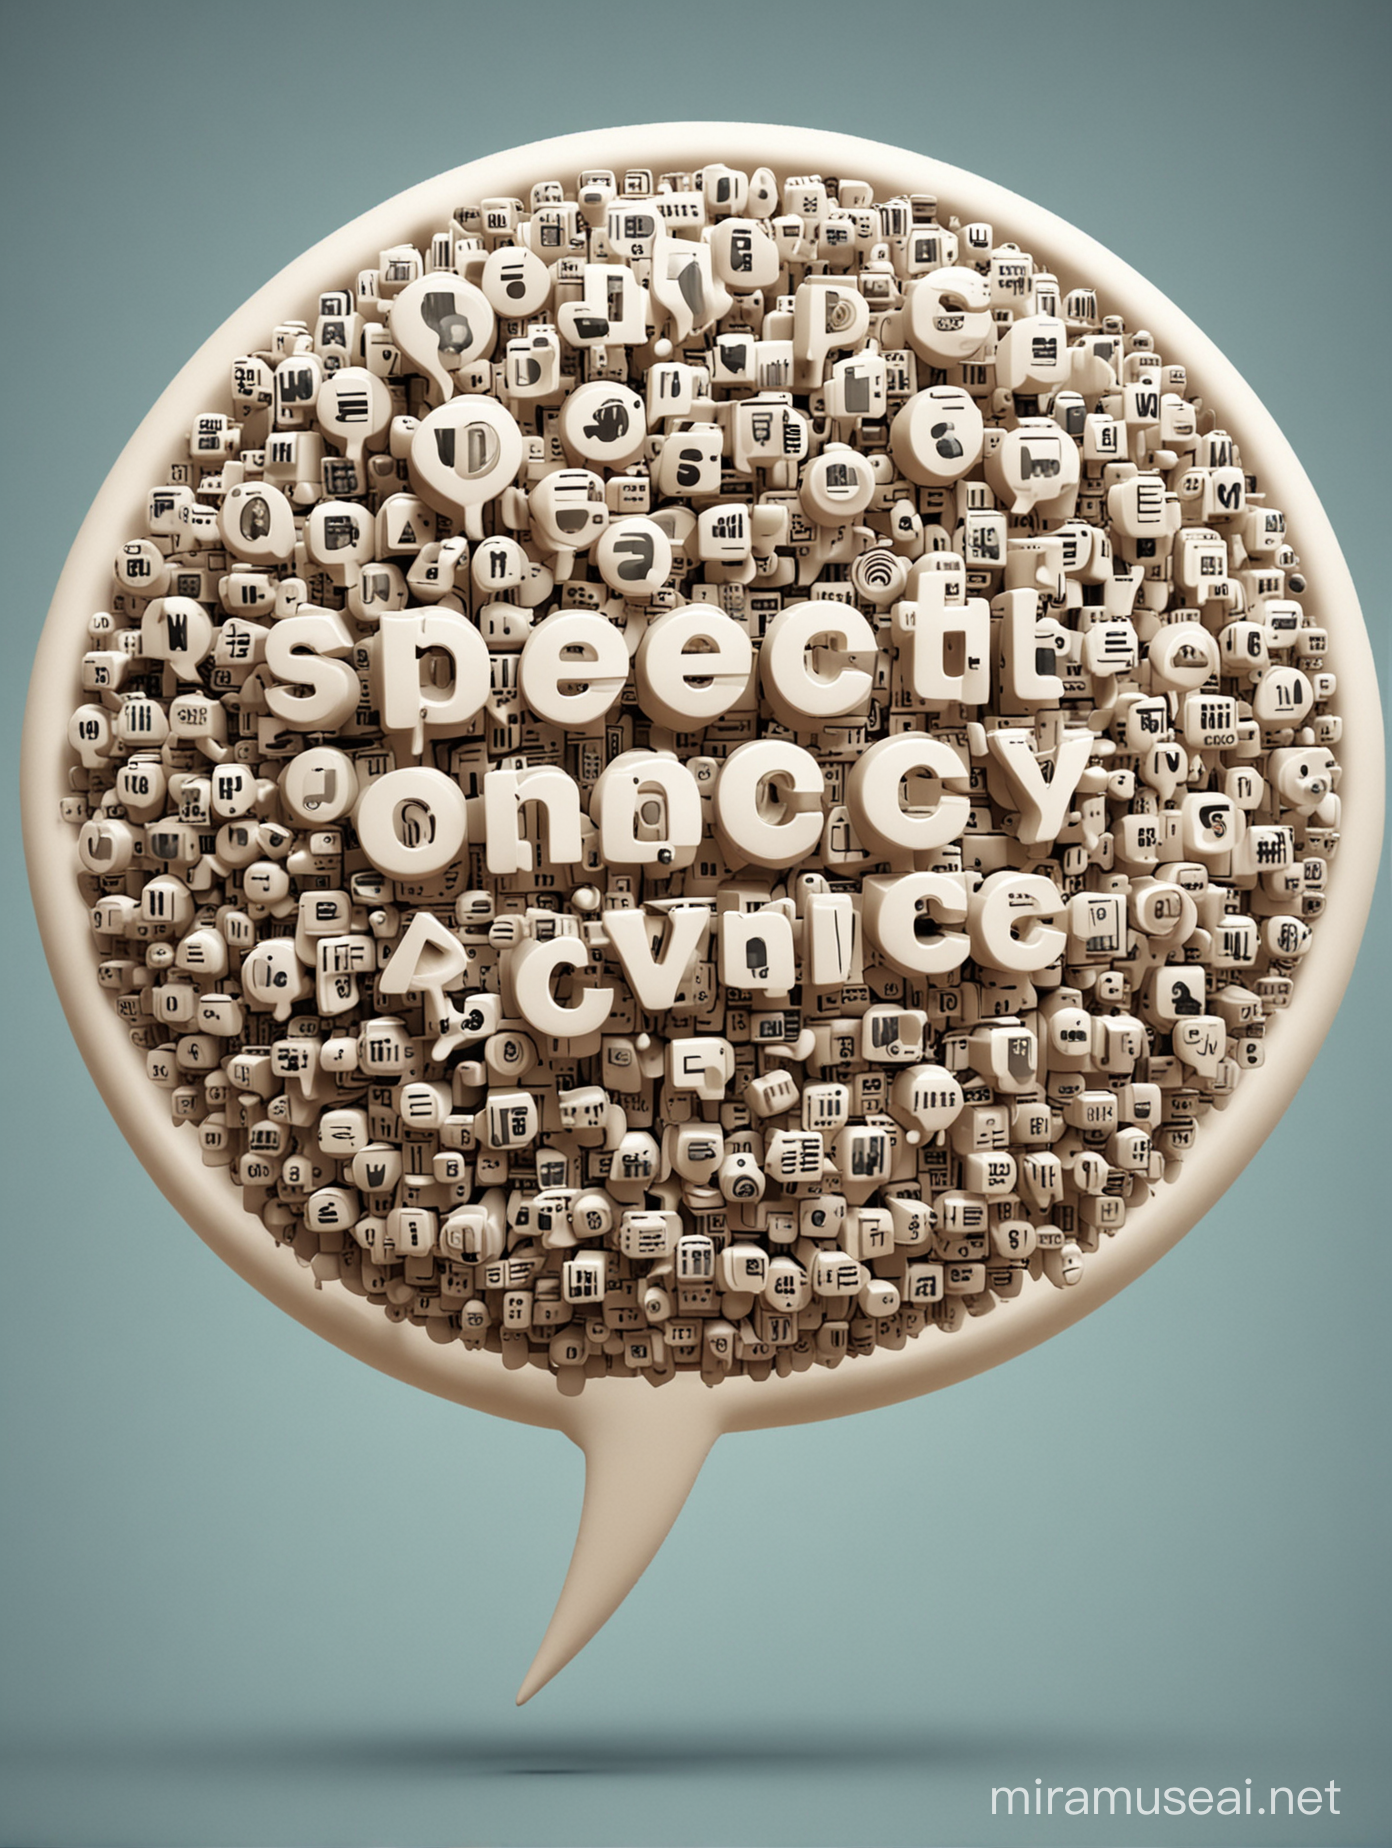 A dynamic array in coalescing into a speech bubble, symbolizing a diverse array of voices